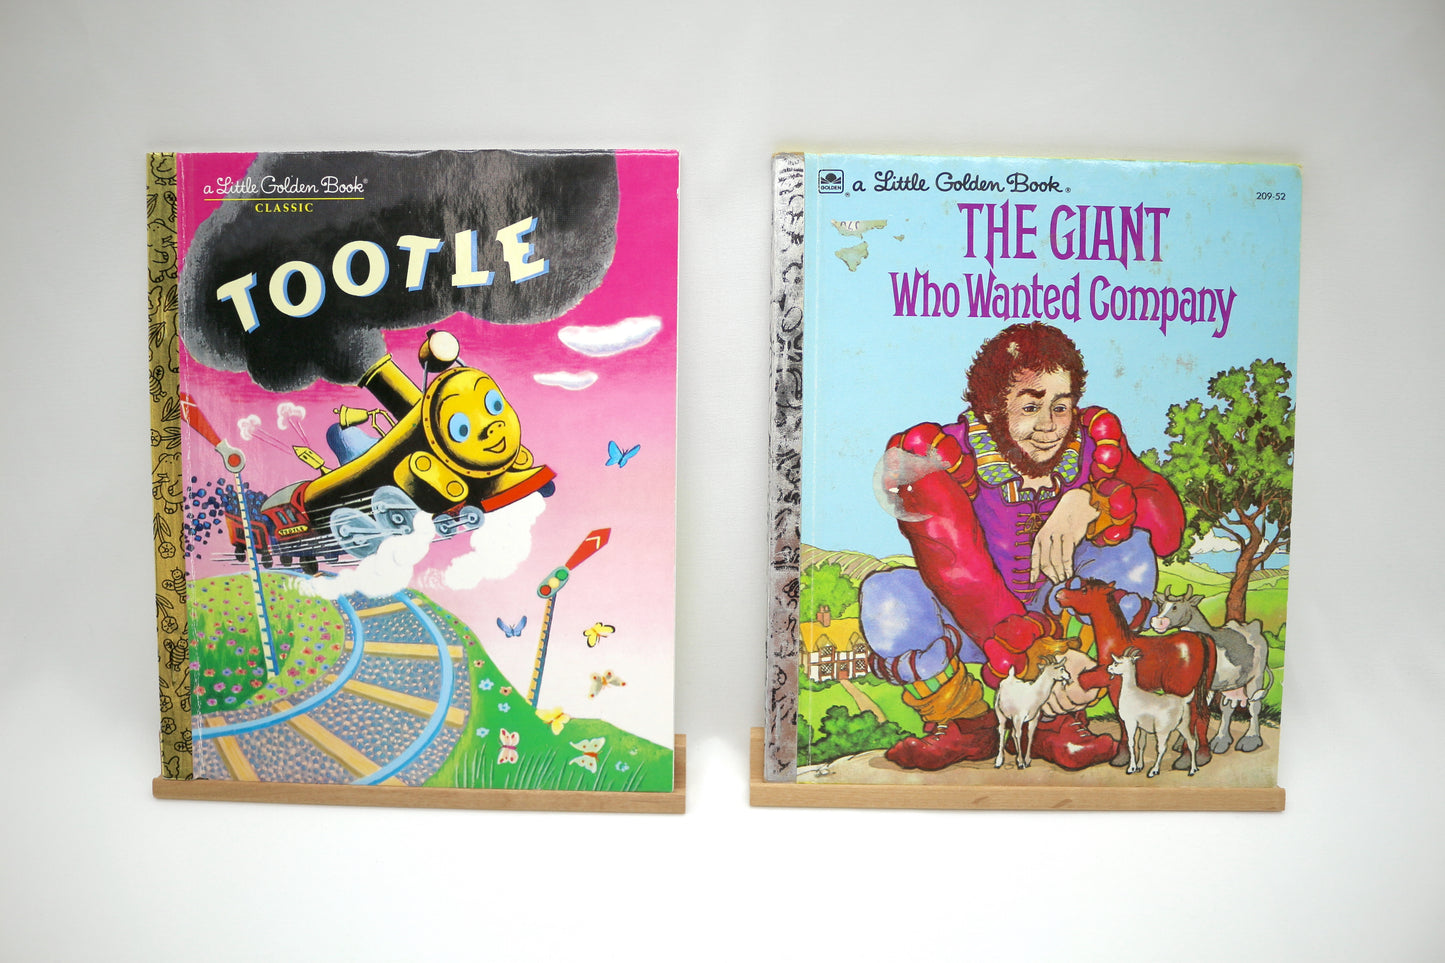 Little Golden Books Tootle OR Little Golden Books The Giant who wanted Company